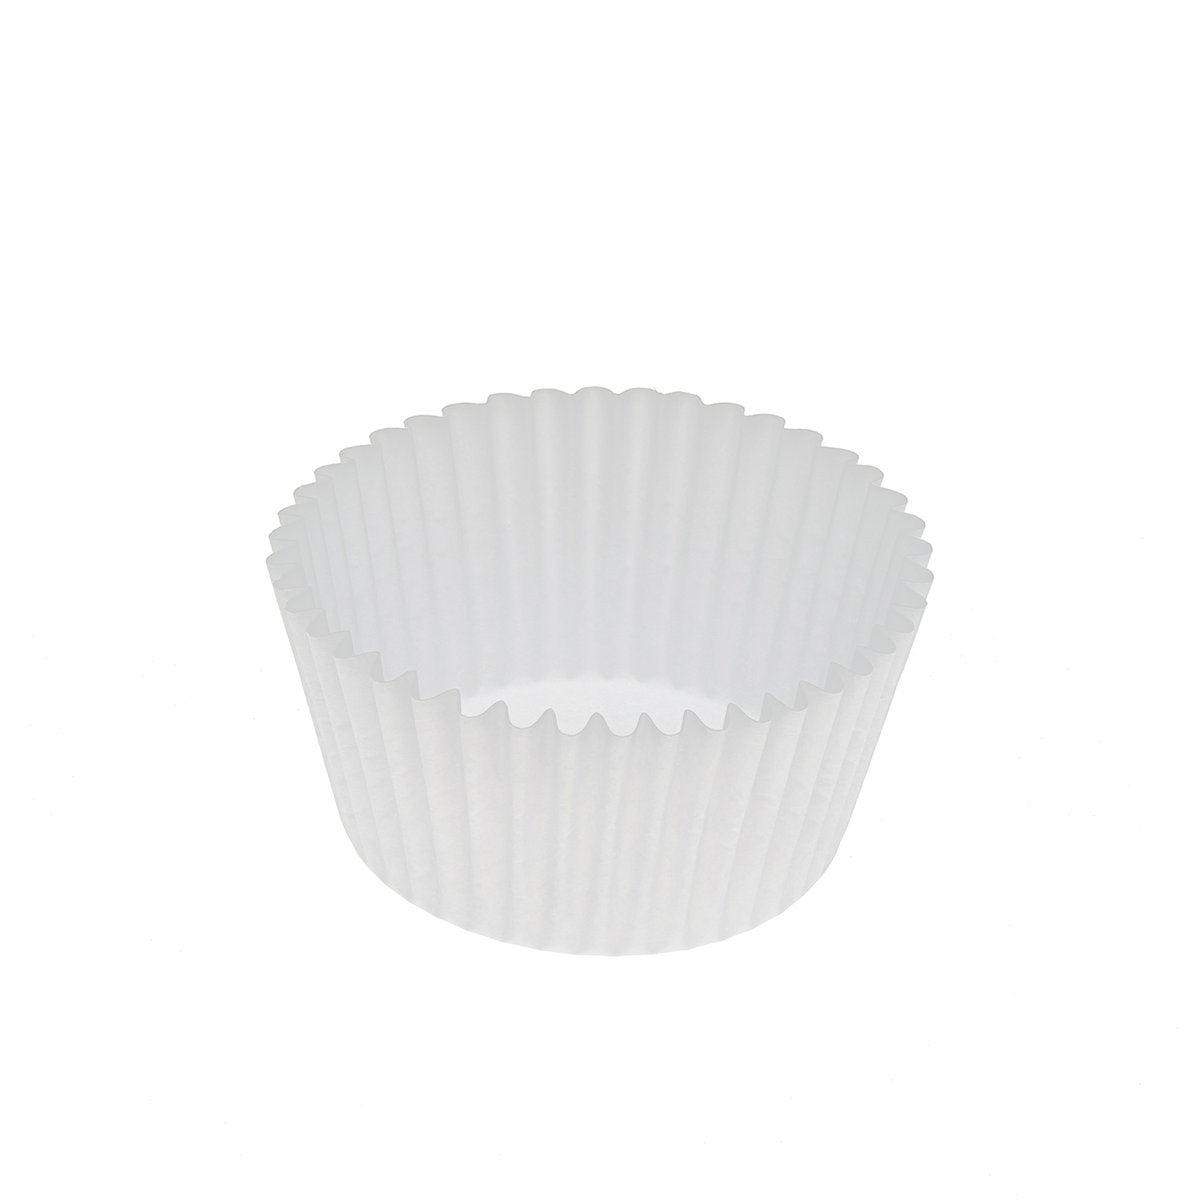 4.5" White Round Baking Paper Cup - 10000 Pcs - HD Plastic Product (Canada). Inc